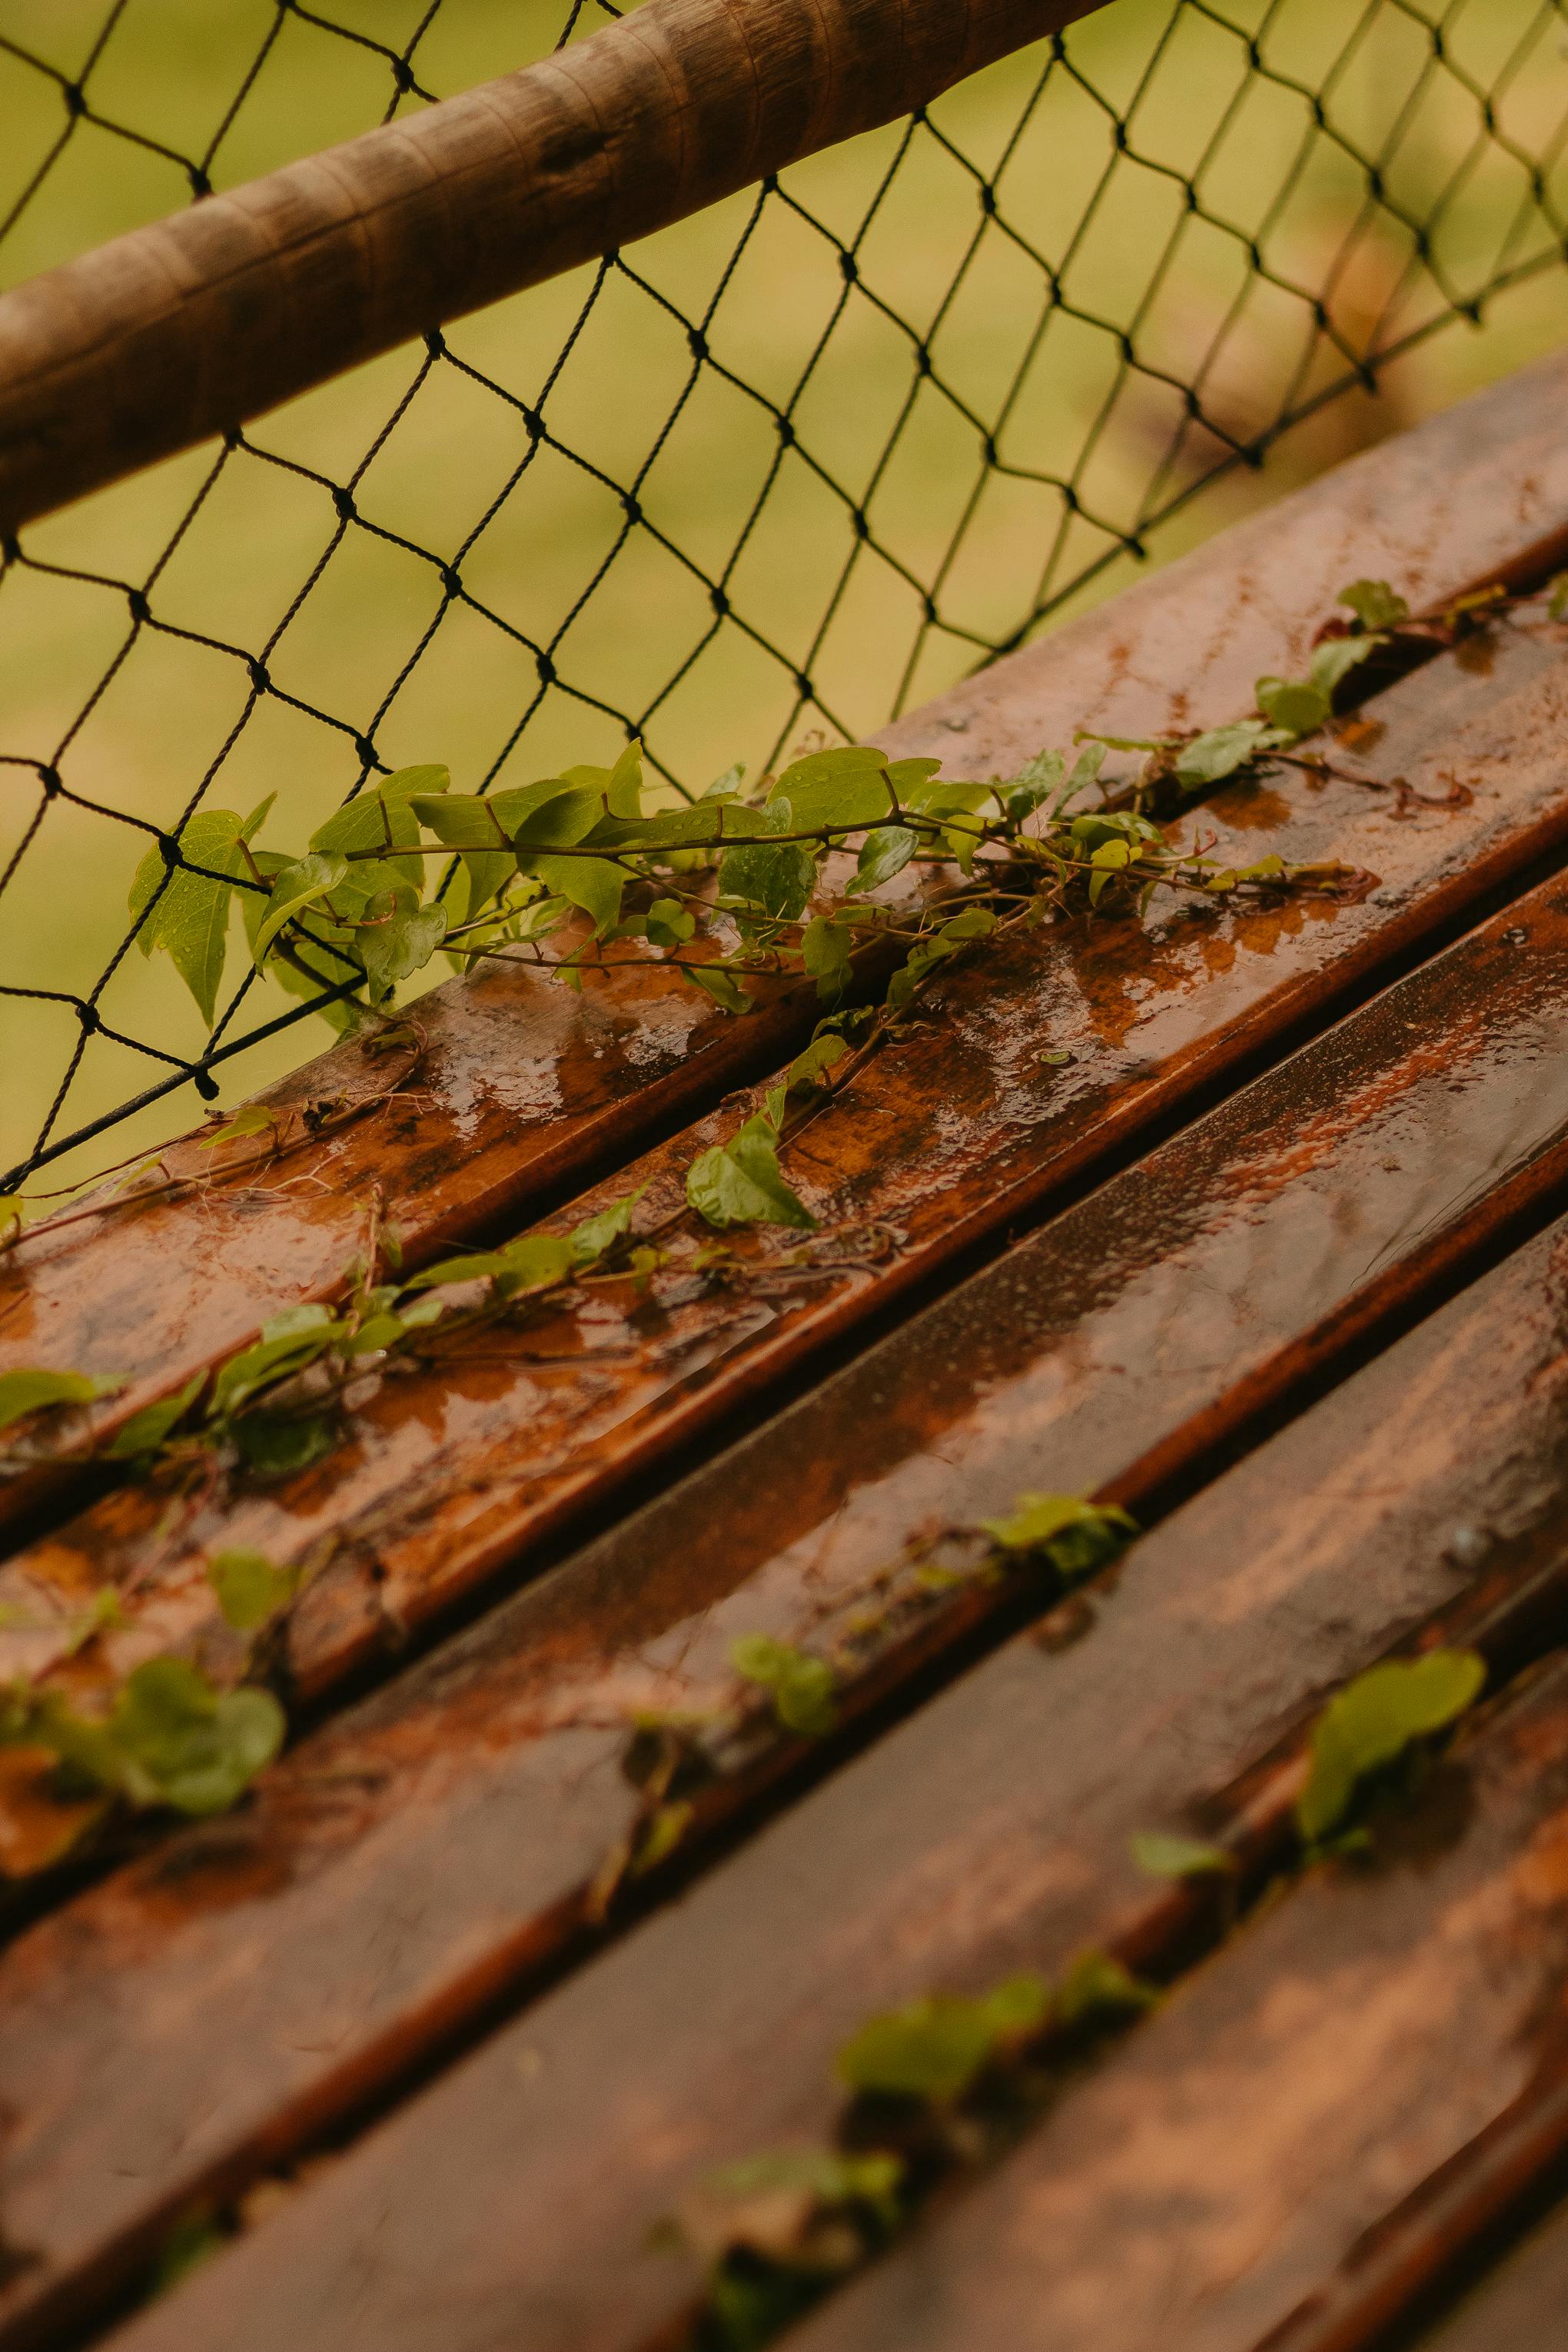 green leaves on wet wooden bench near chain link fence